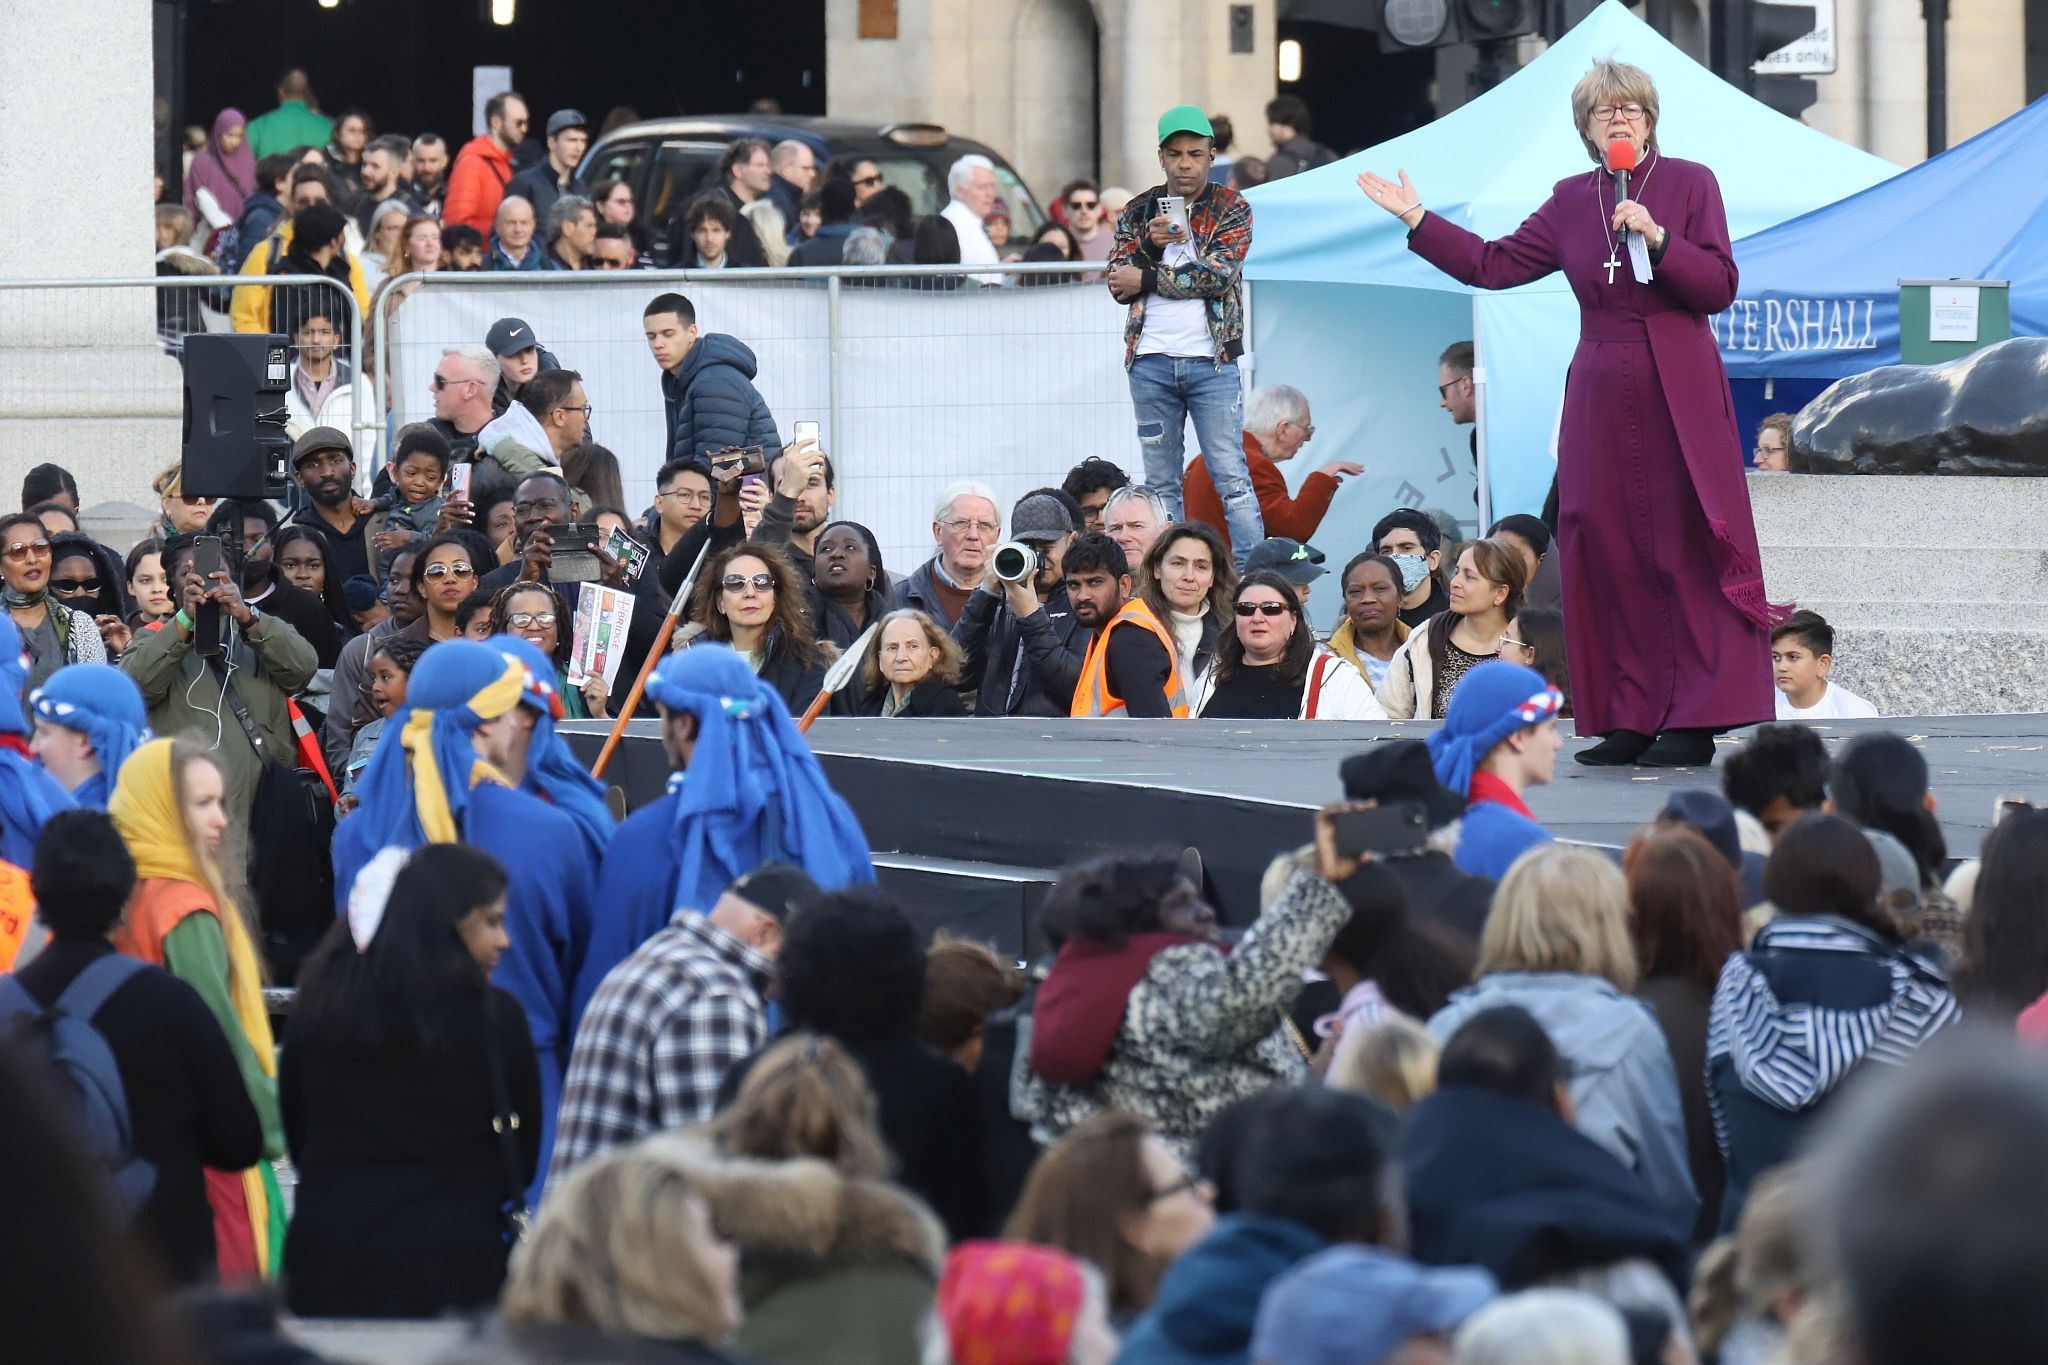 The Good Friday Wintershall Easter Passion Play "The Passion of Jesus" presented at Trafalgar Square in London. 7th April 2023. Sarah Mullally, Bishop of London, led the audience in a recitation of The Lord's Prayer.